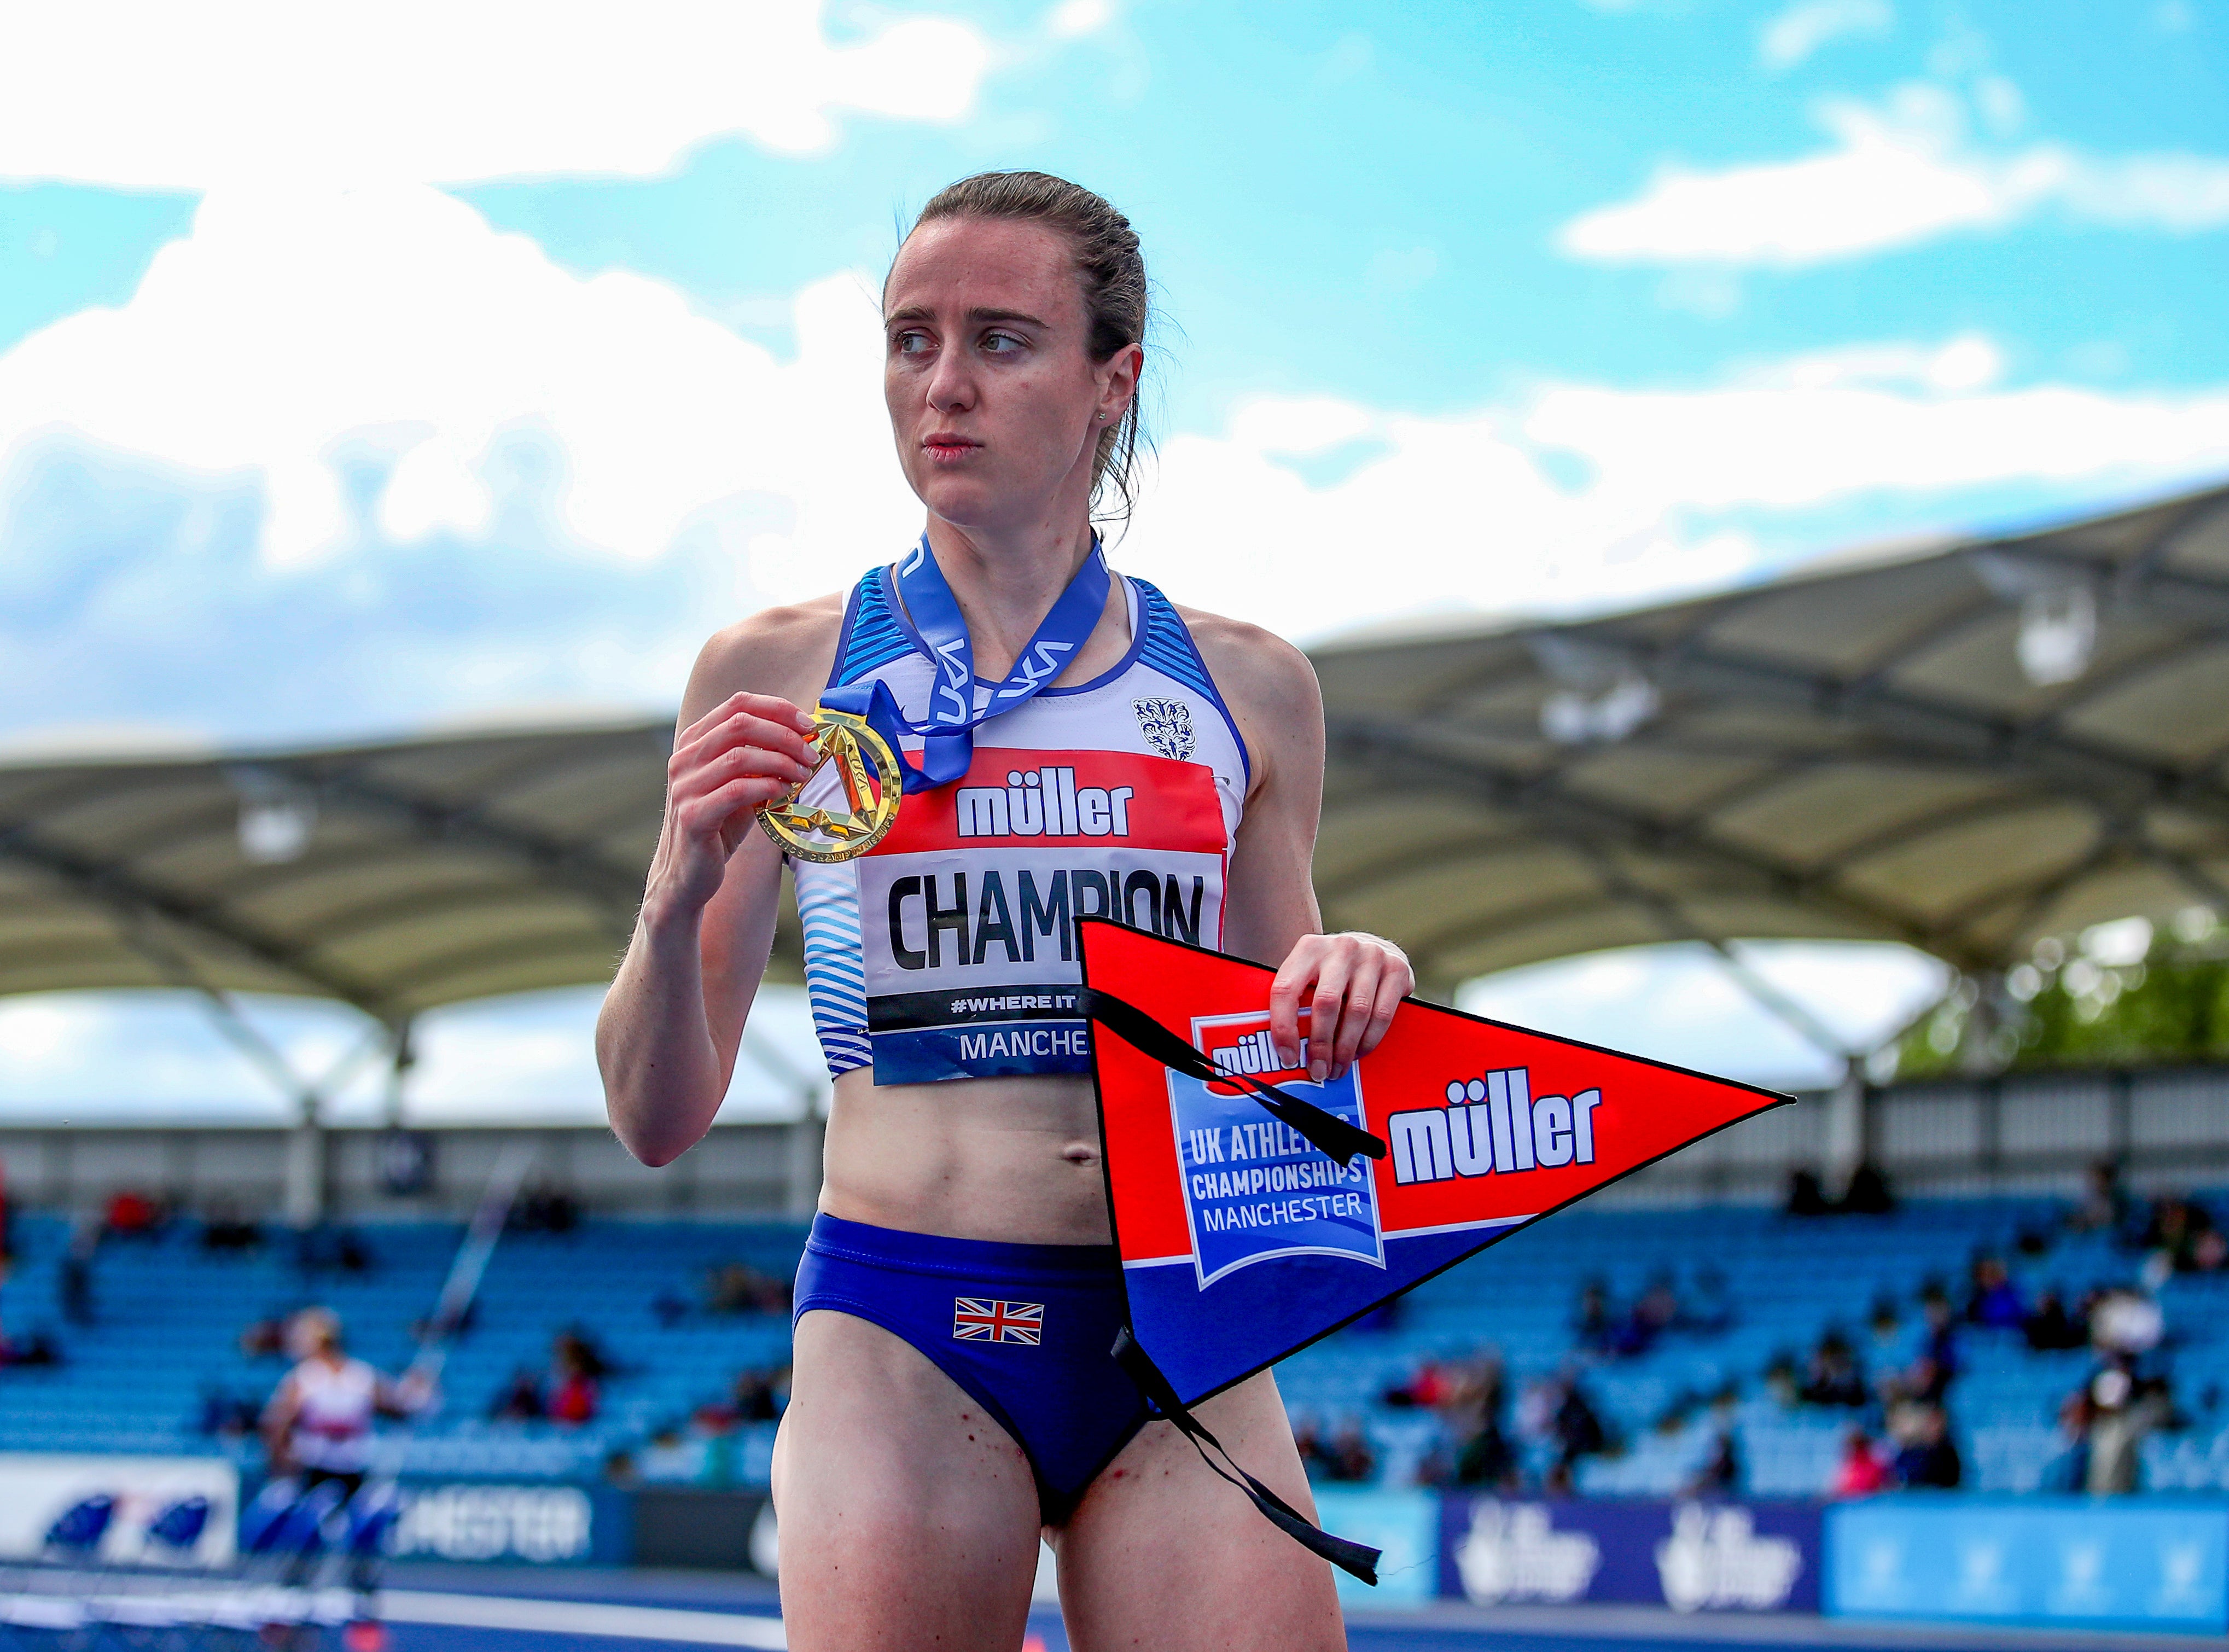 Laura Muir won the 1500m final at last weekend’s Muller UK Athletics Championships in Manchester.